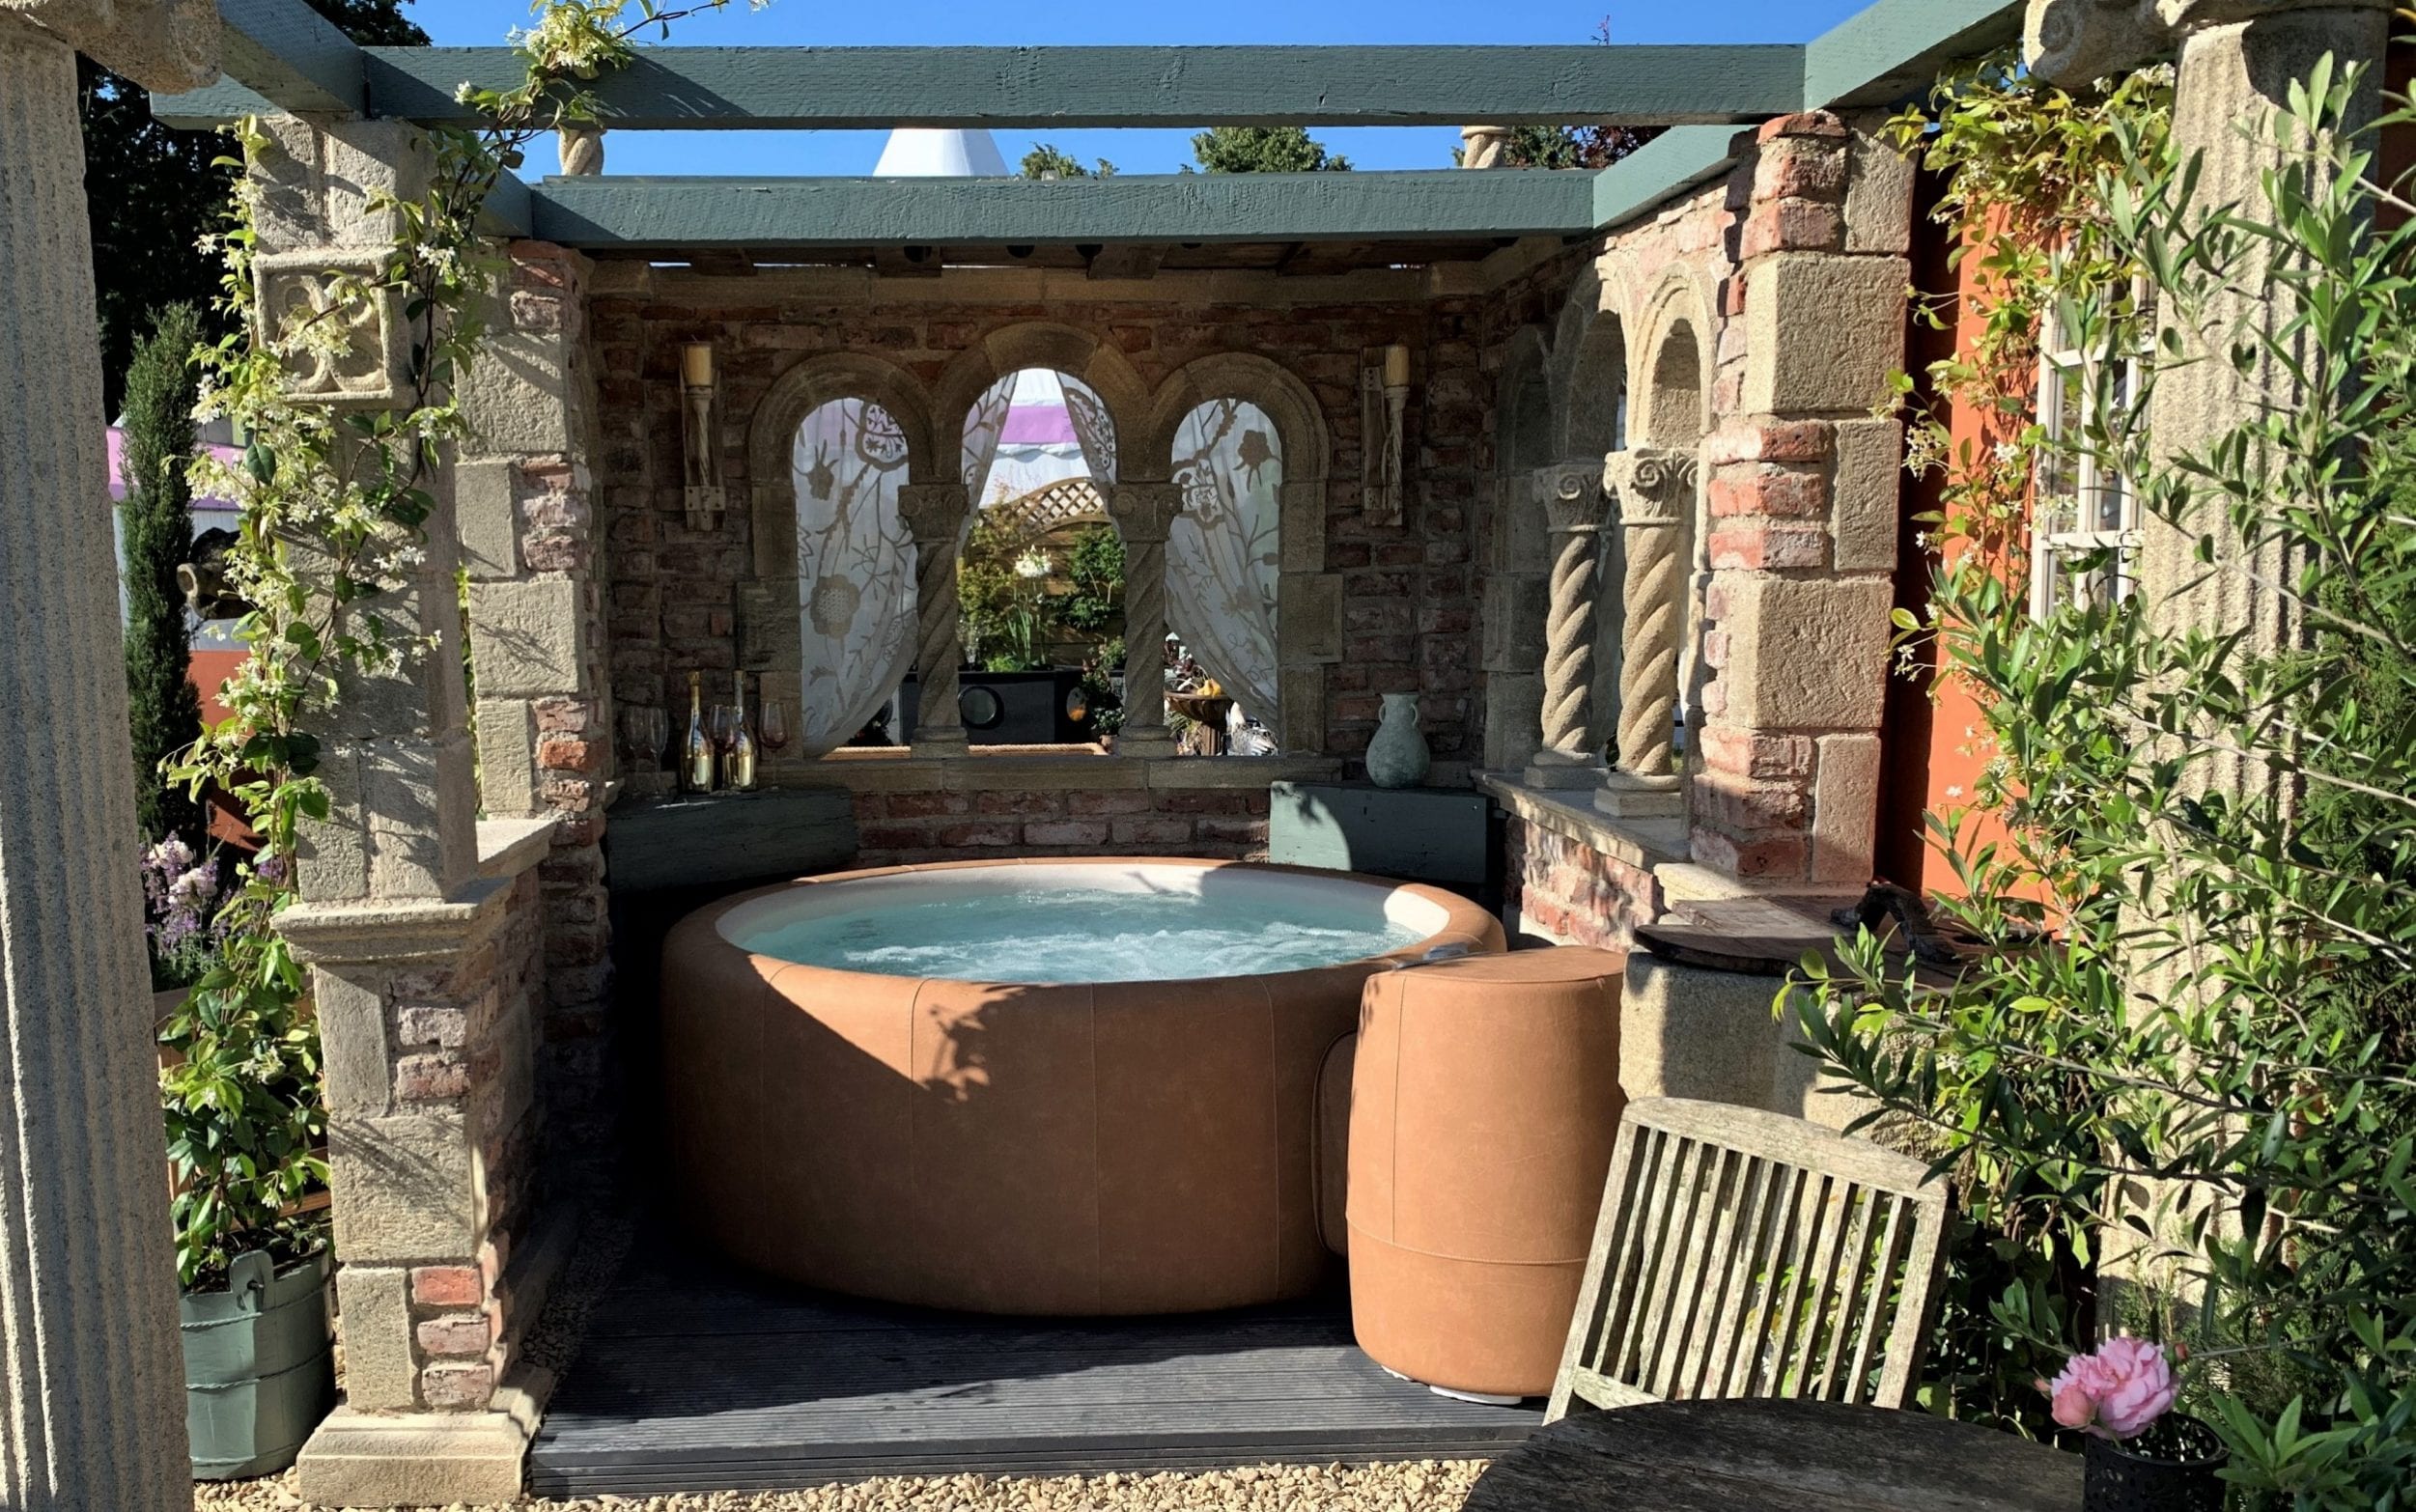 Ways to Make Your Small Garden Hot Tub the Ultimate Relaxation Destination